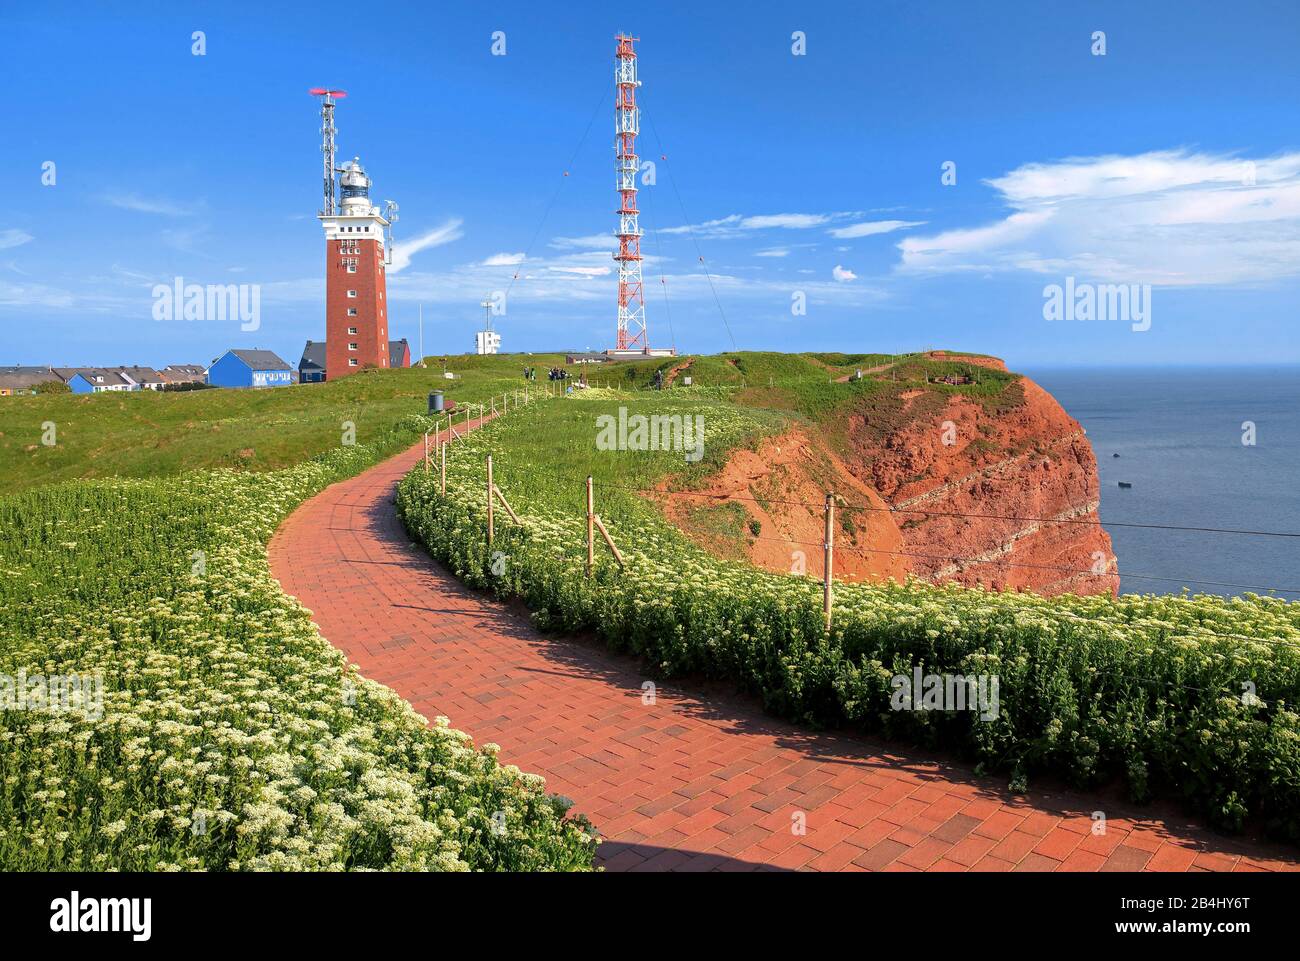 Round trip on the cliffs on the Oberland with lighthouse and transmission tower, Heligoland, Helgoland Bay, German Bight, North Sea island, North Sea, Schleswig-Holstein, Germany Stock Photo